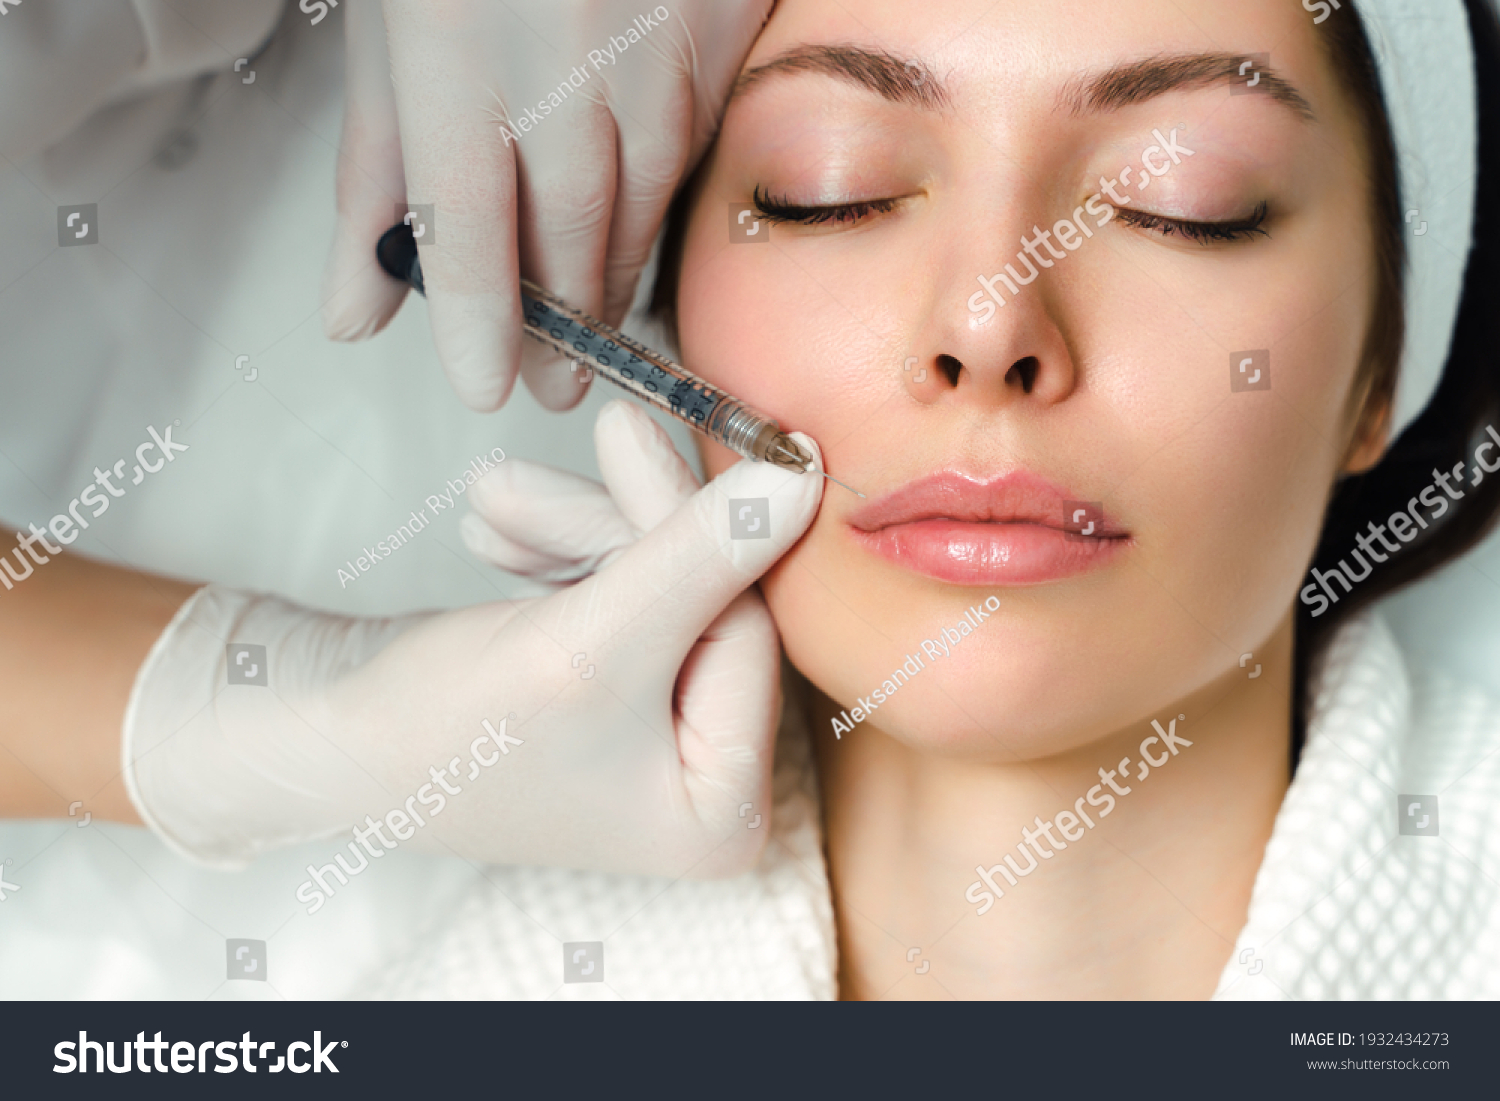 Lip augmentation and correction procedure in a cosmetology salon. The specialist makes an injection in the patient's lips #1932434273